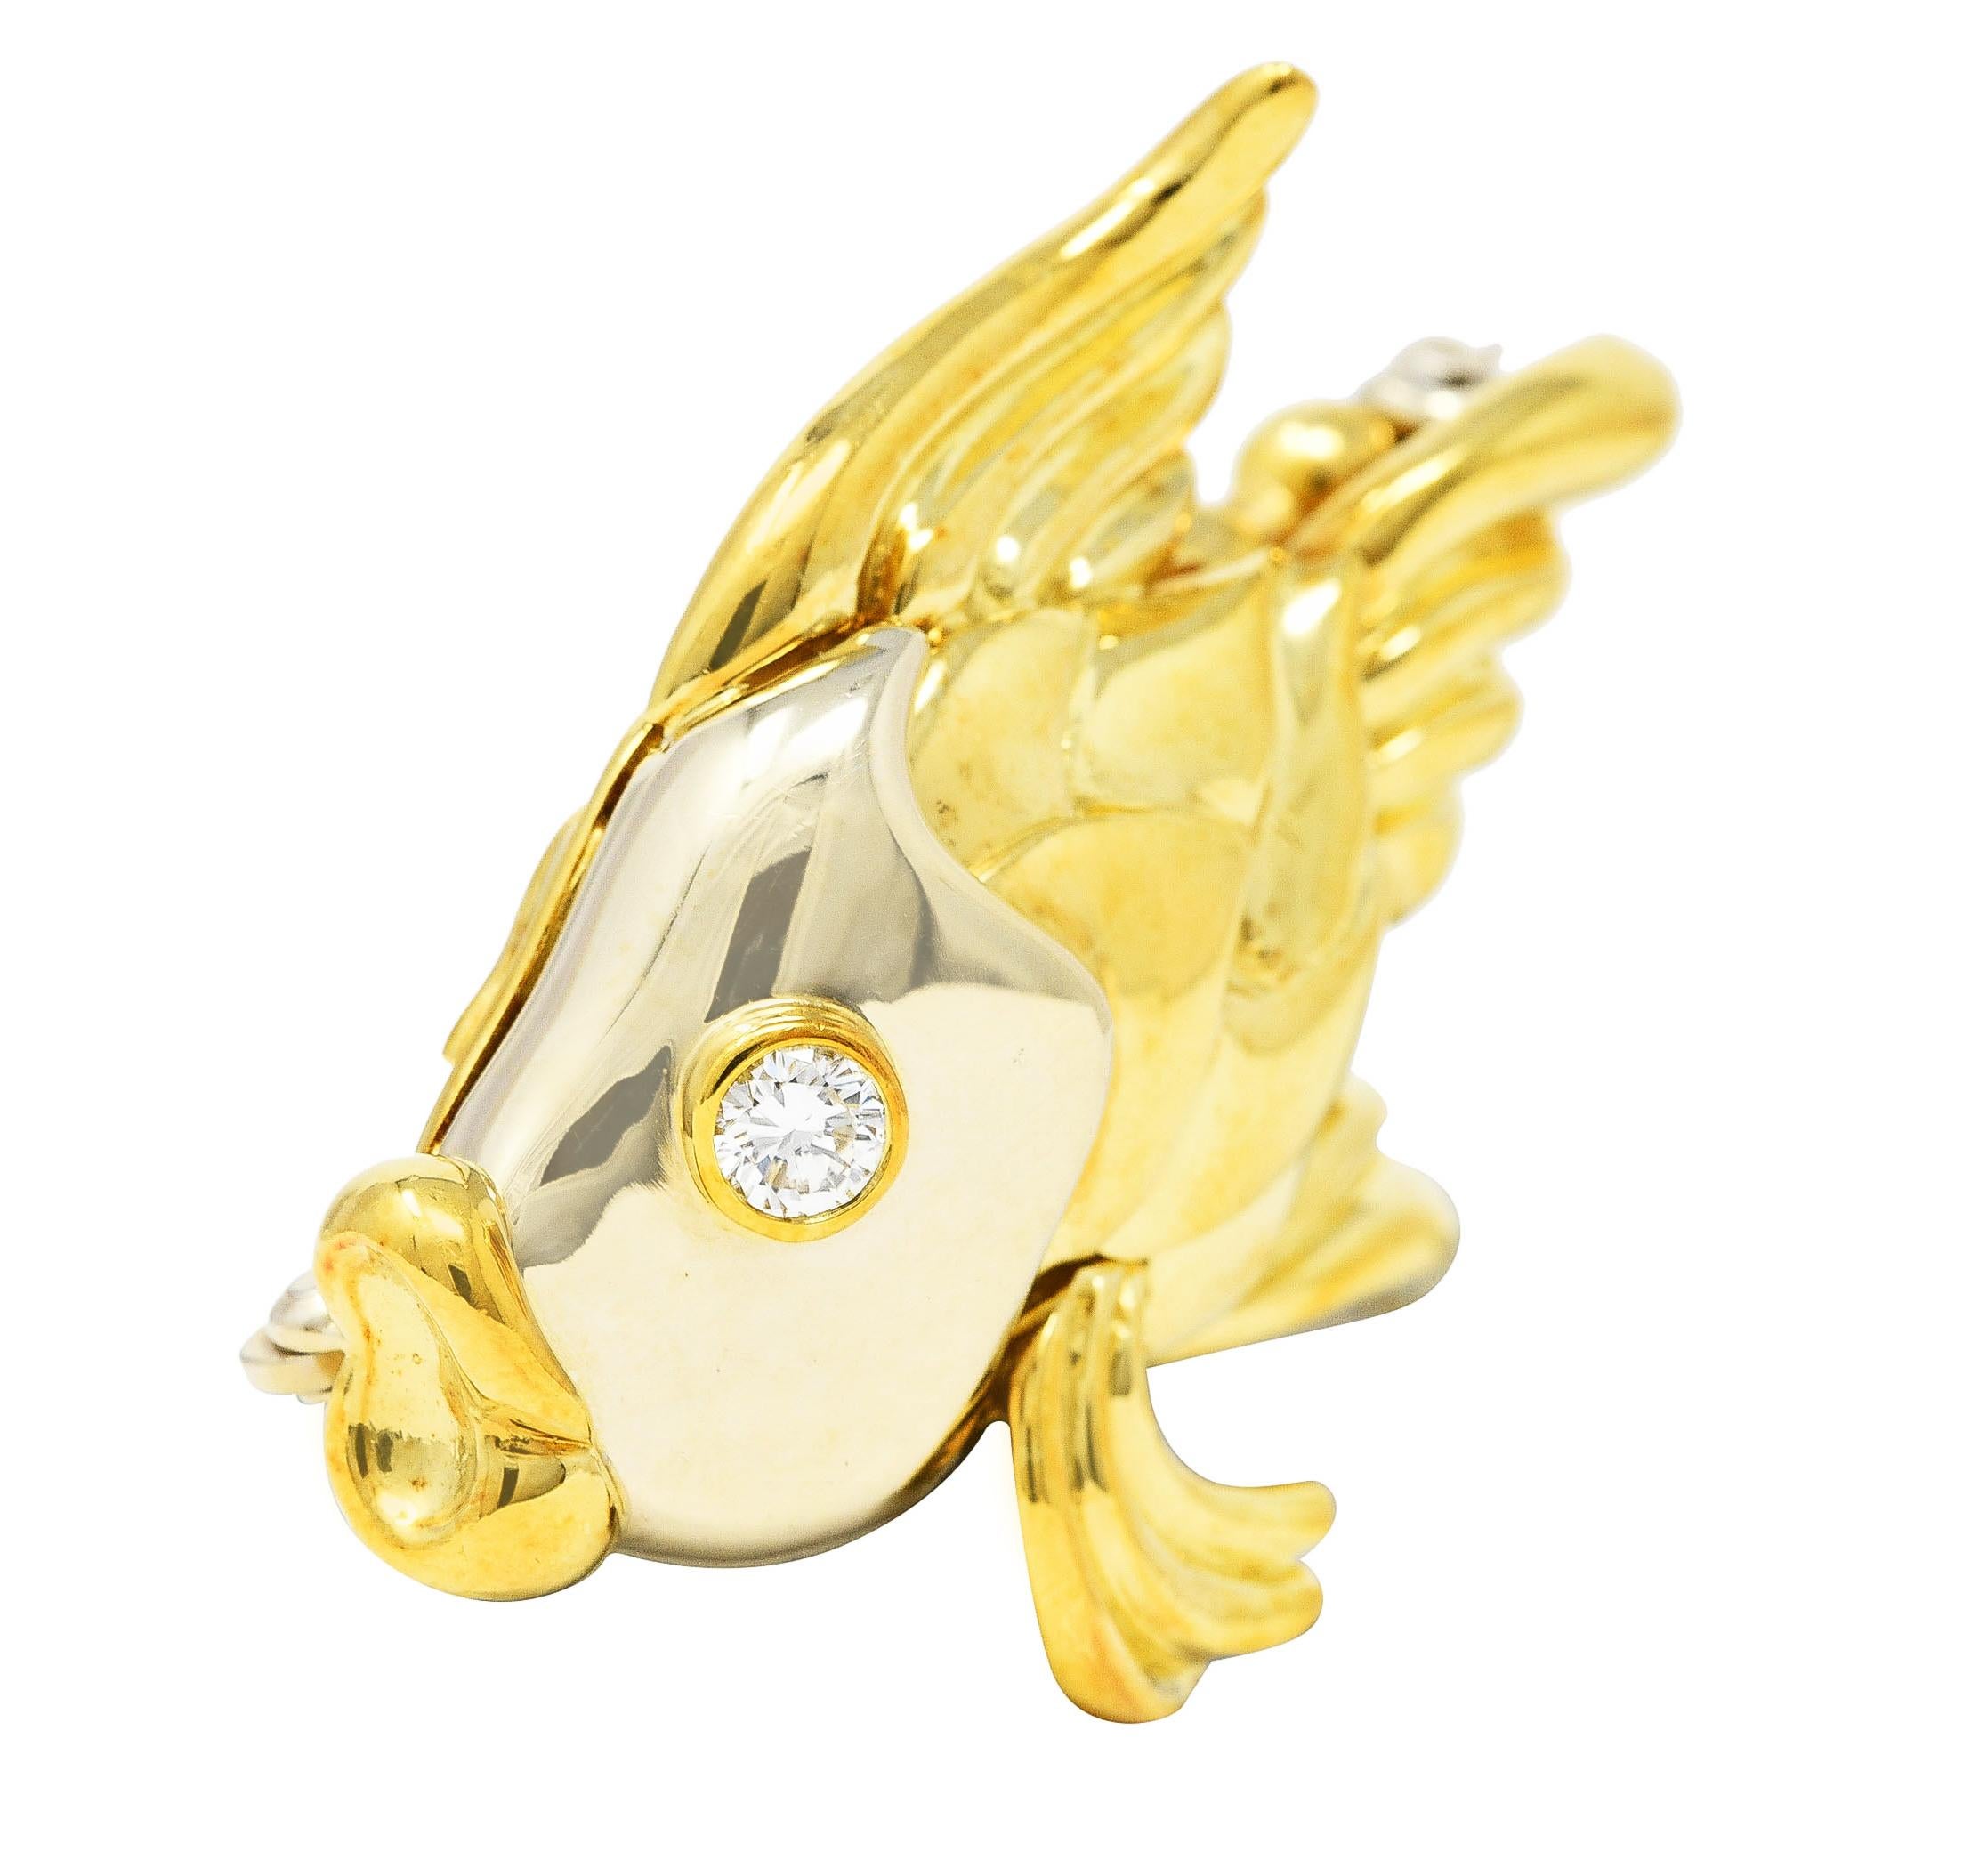 Designed as a stylized goldfish with a white gold face, puffed scales and flowing fins. Accented by a round brilliant cut diamond eye weighing approximately 0.14 carat total. Eye clean and bright - bezel set. Completed by hinged pin stem with